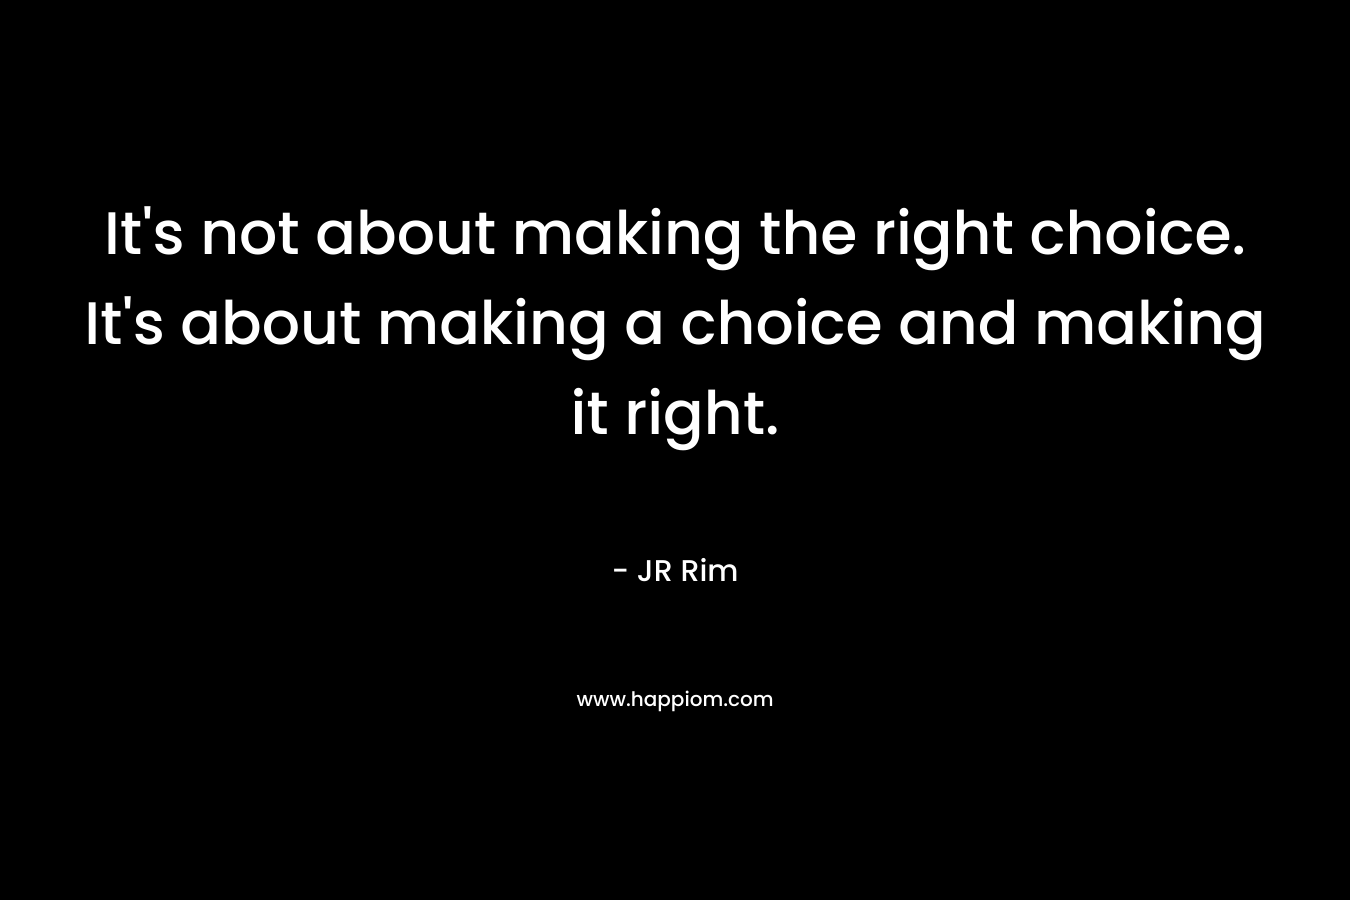 It's not about making the right choice. It's about making a choice and making it right.